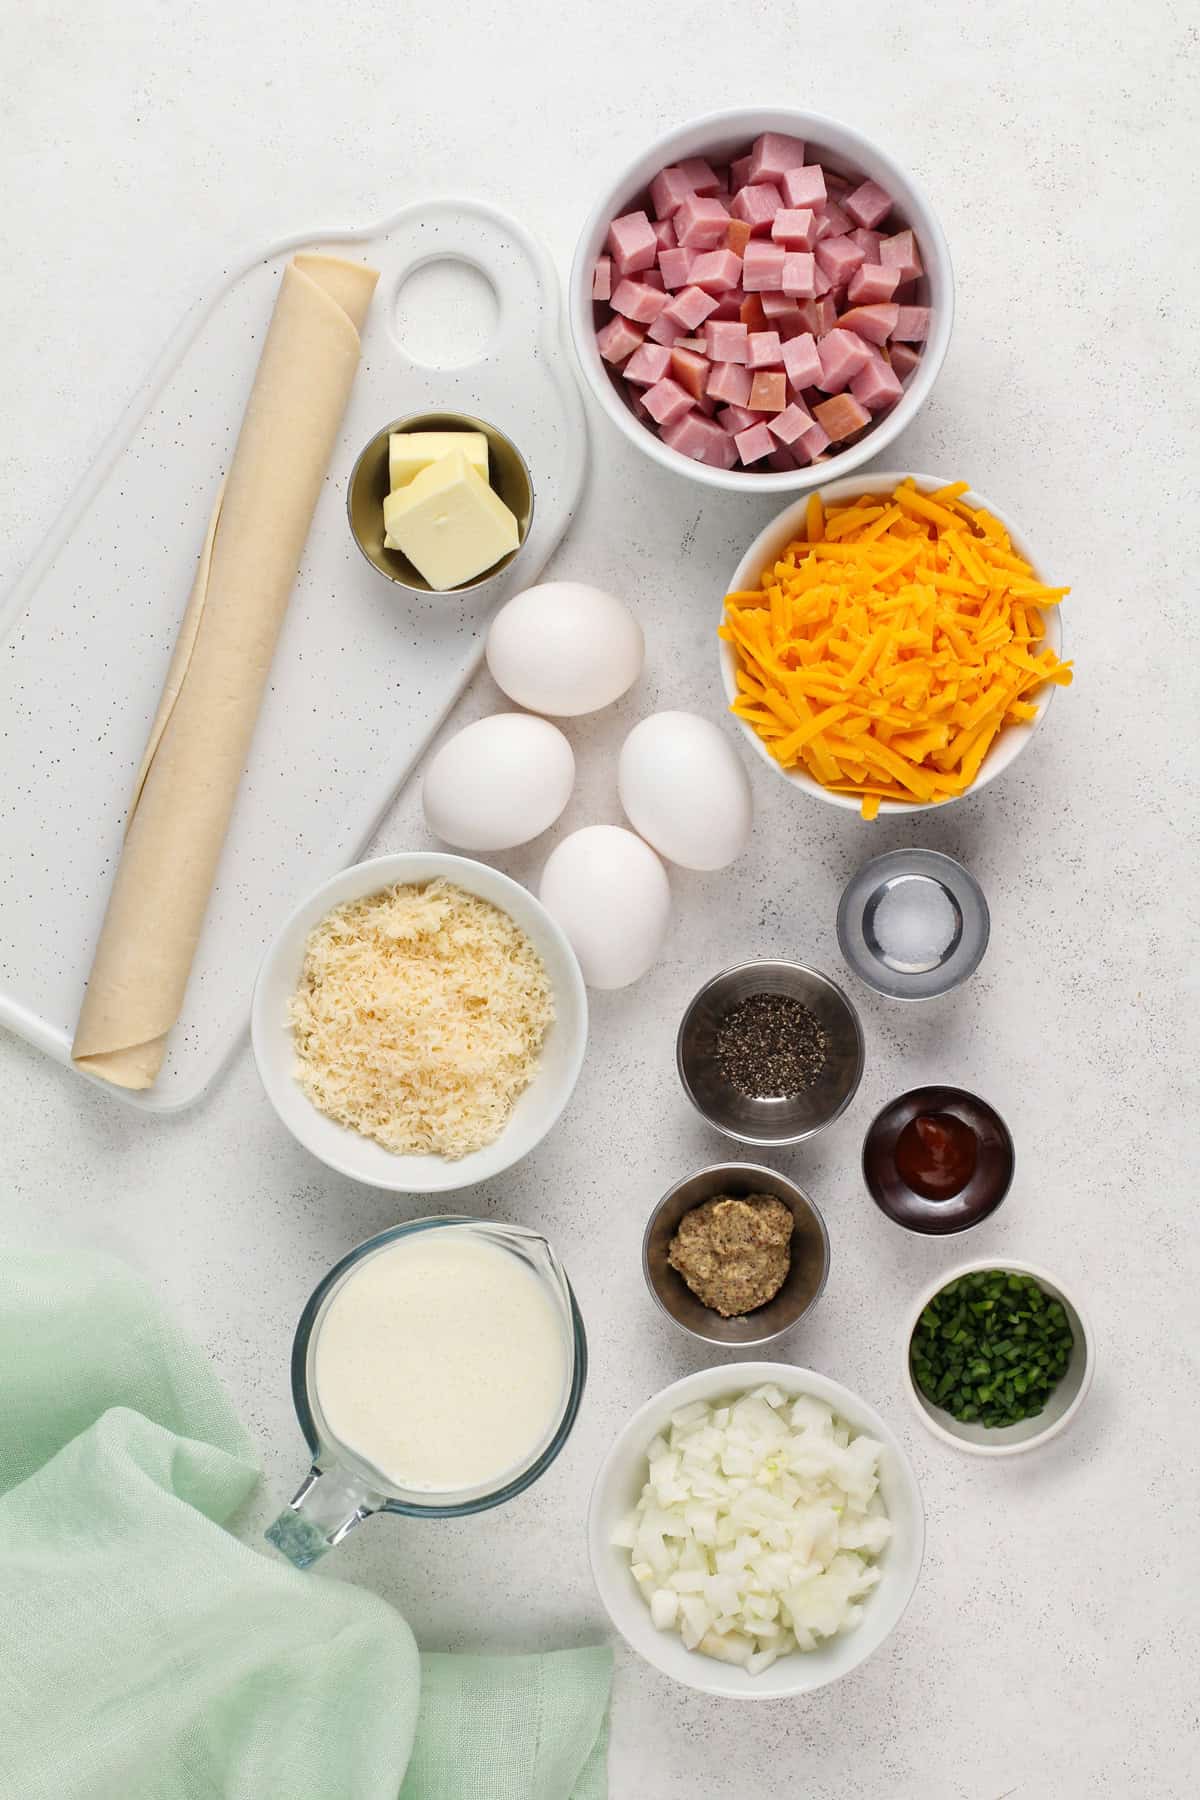 Ingredients for ham and cheese quiche arranged on a countertop.